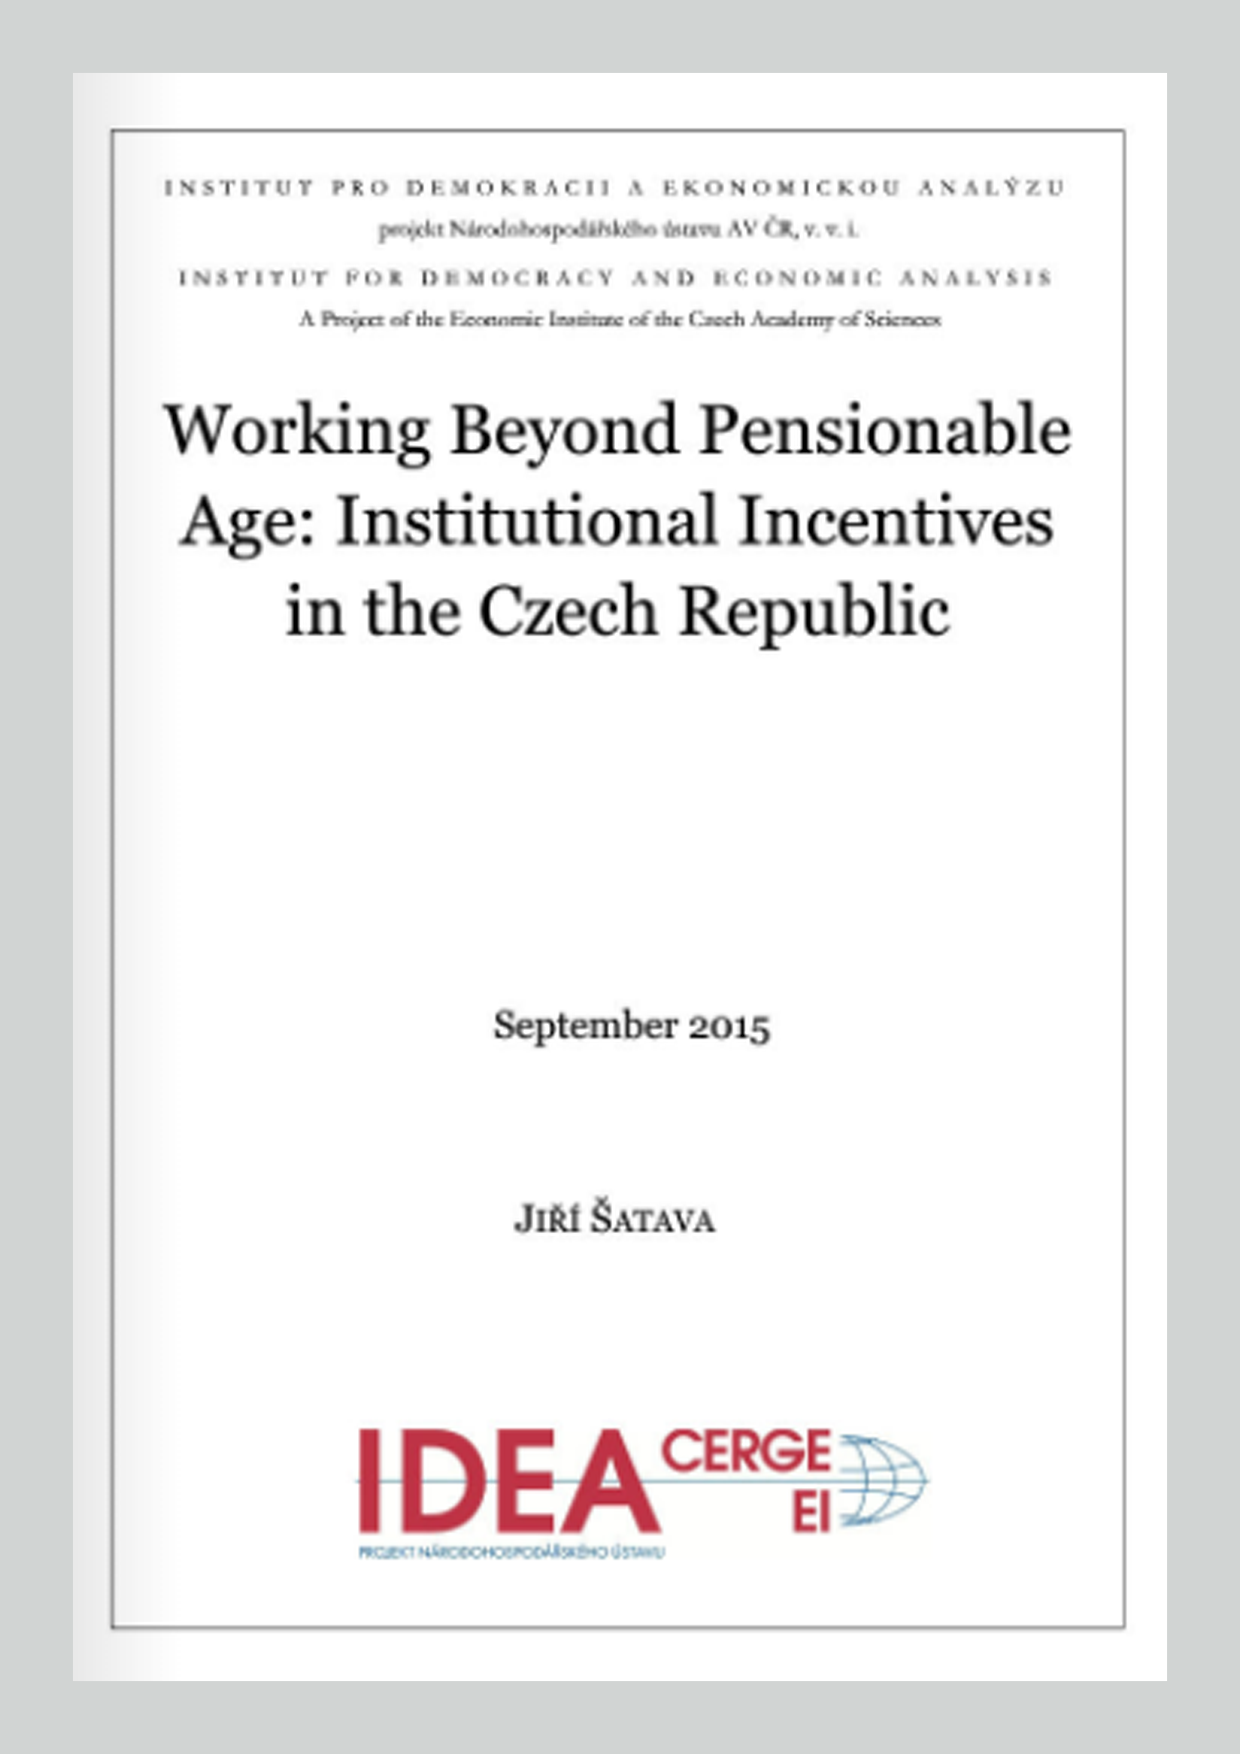 Working Beyond Pensionable Age: Institutional Incentives in the Czech Republic